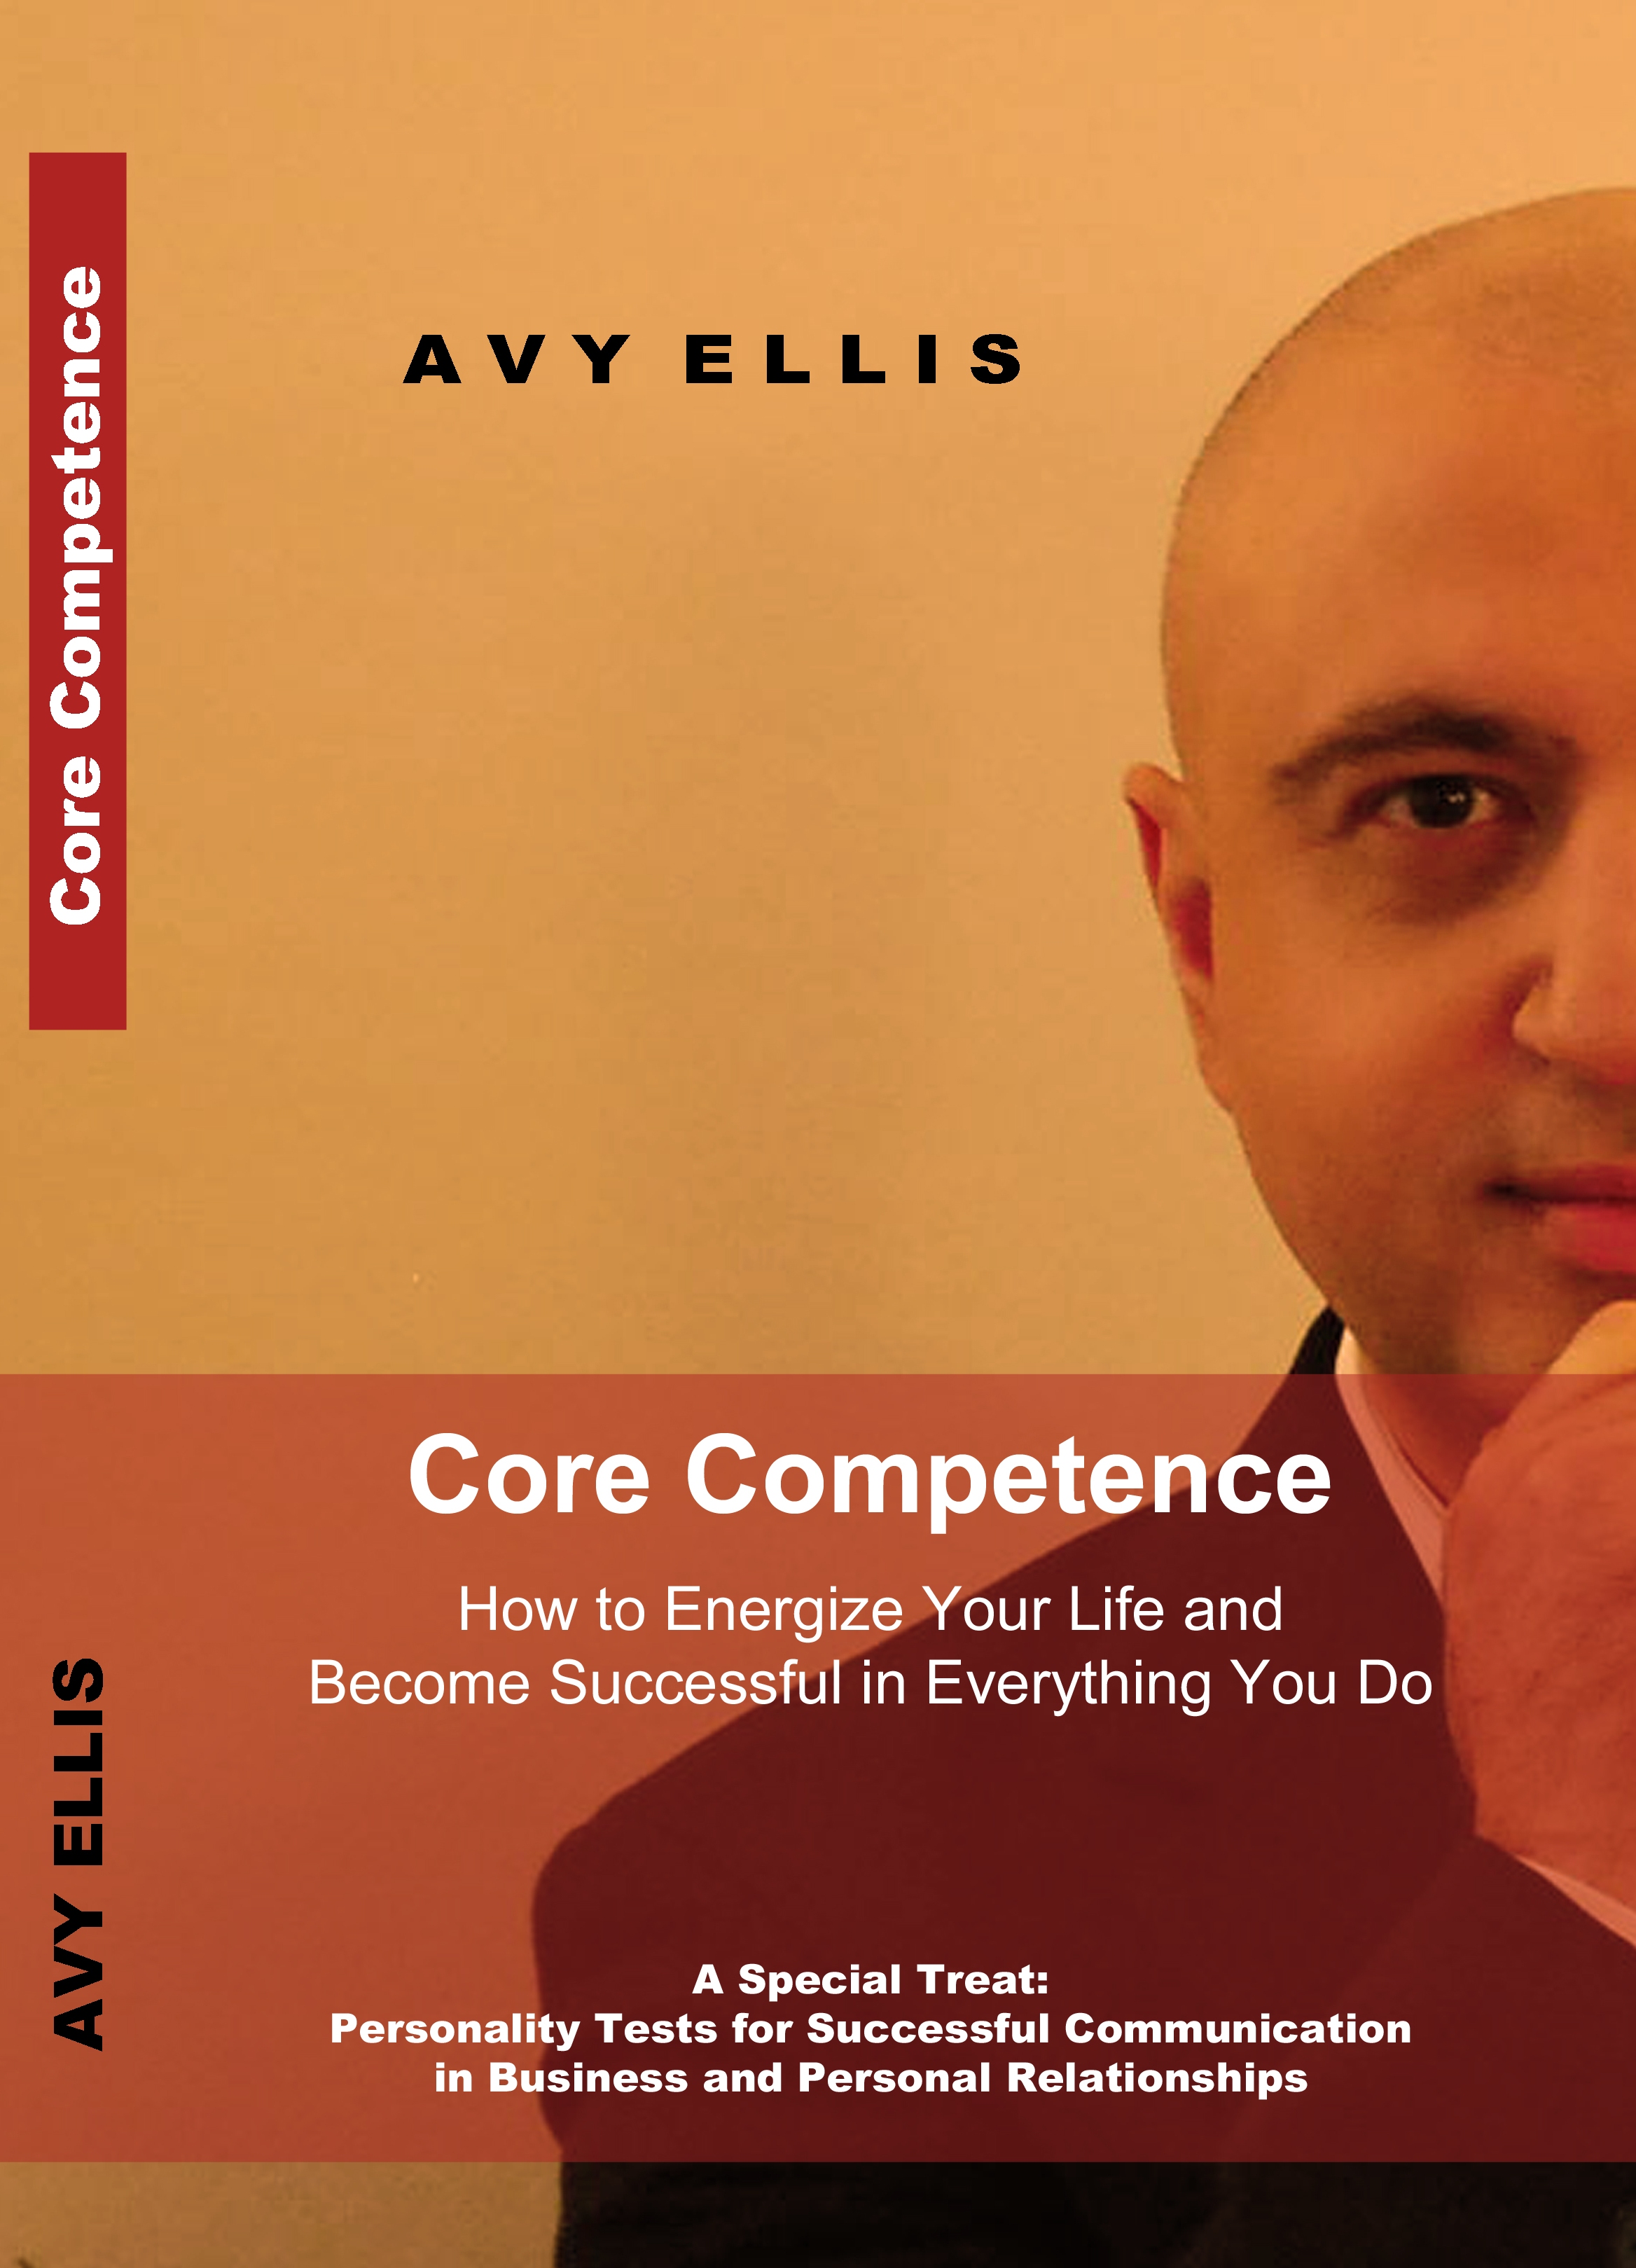 Core Competence: How to Energize Your Life and Become Successful in Everything You Do